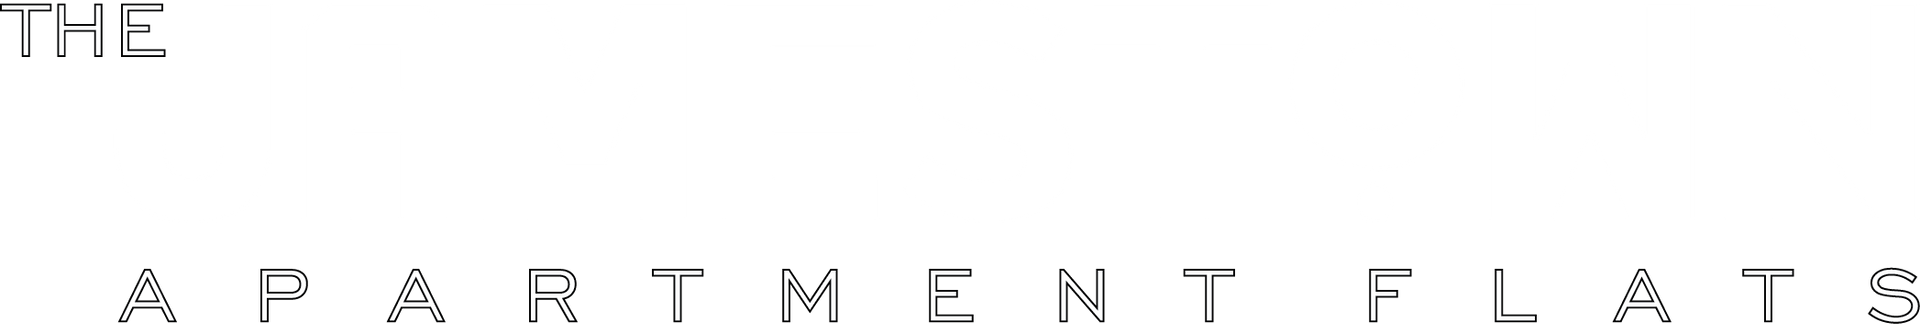 The Jamestown Apartment Flats logo in white color.